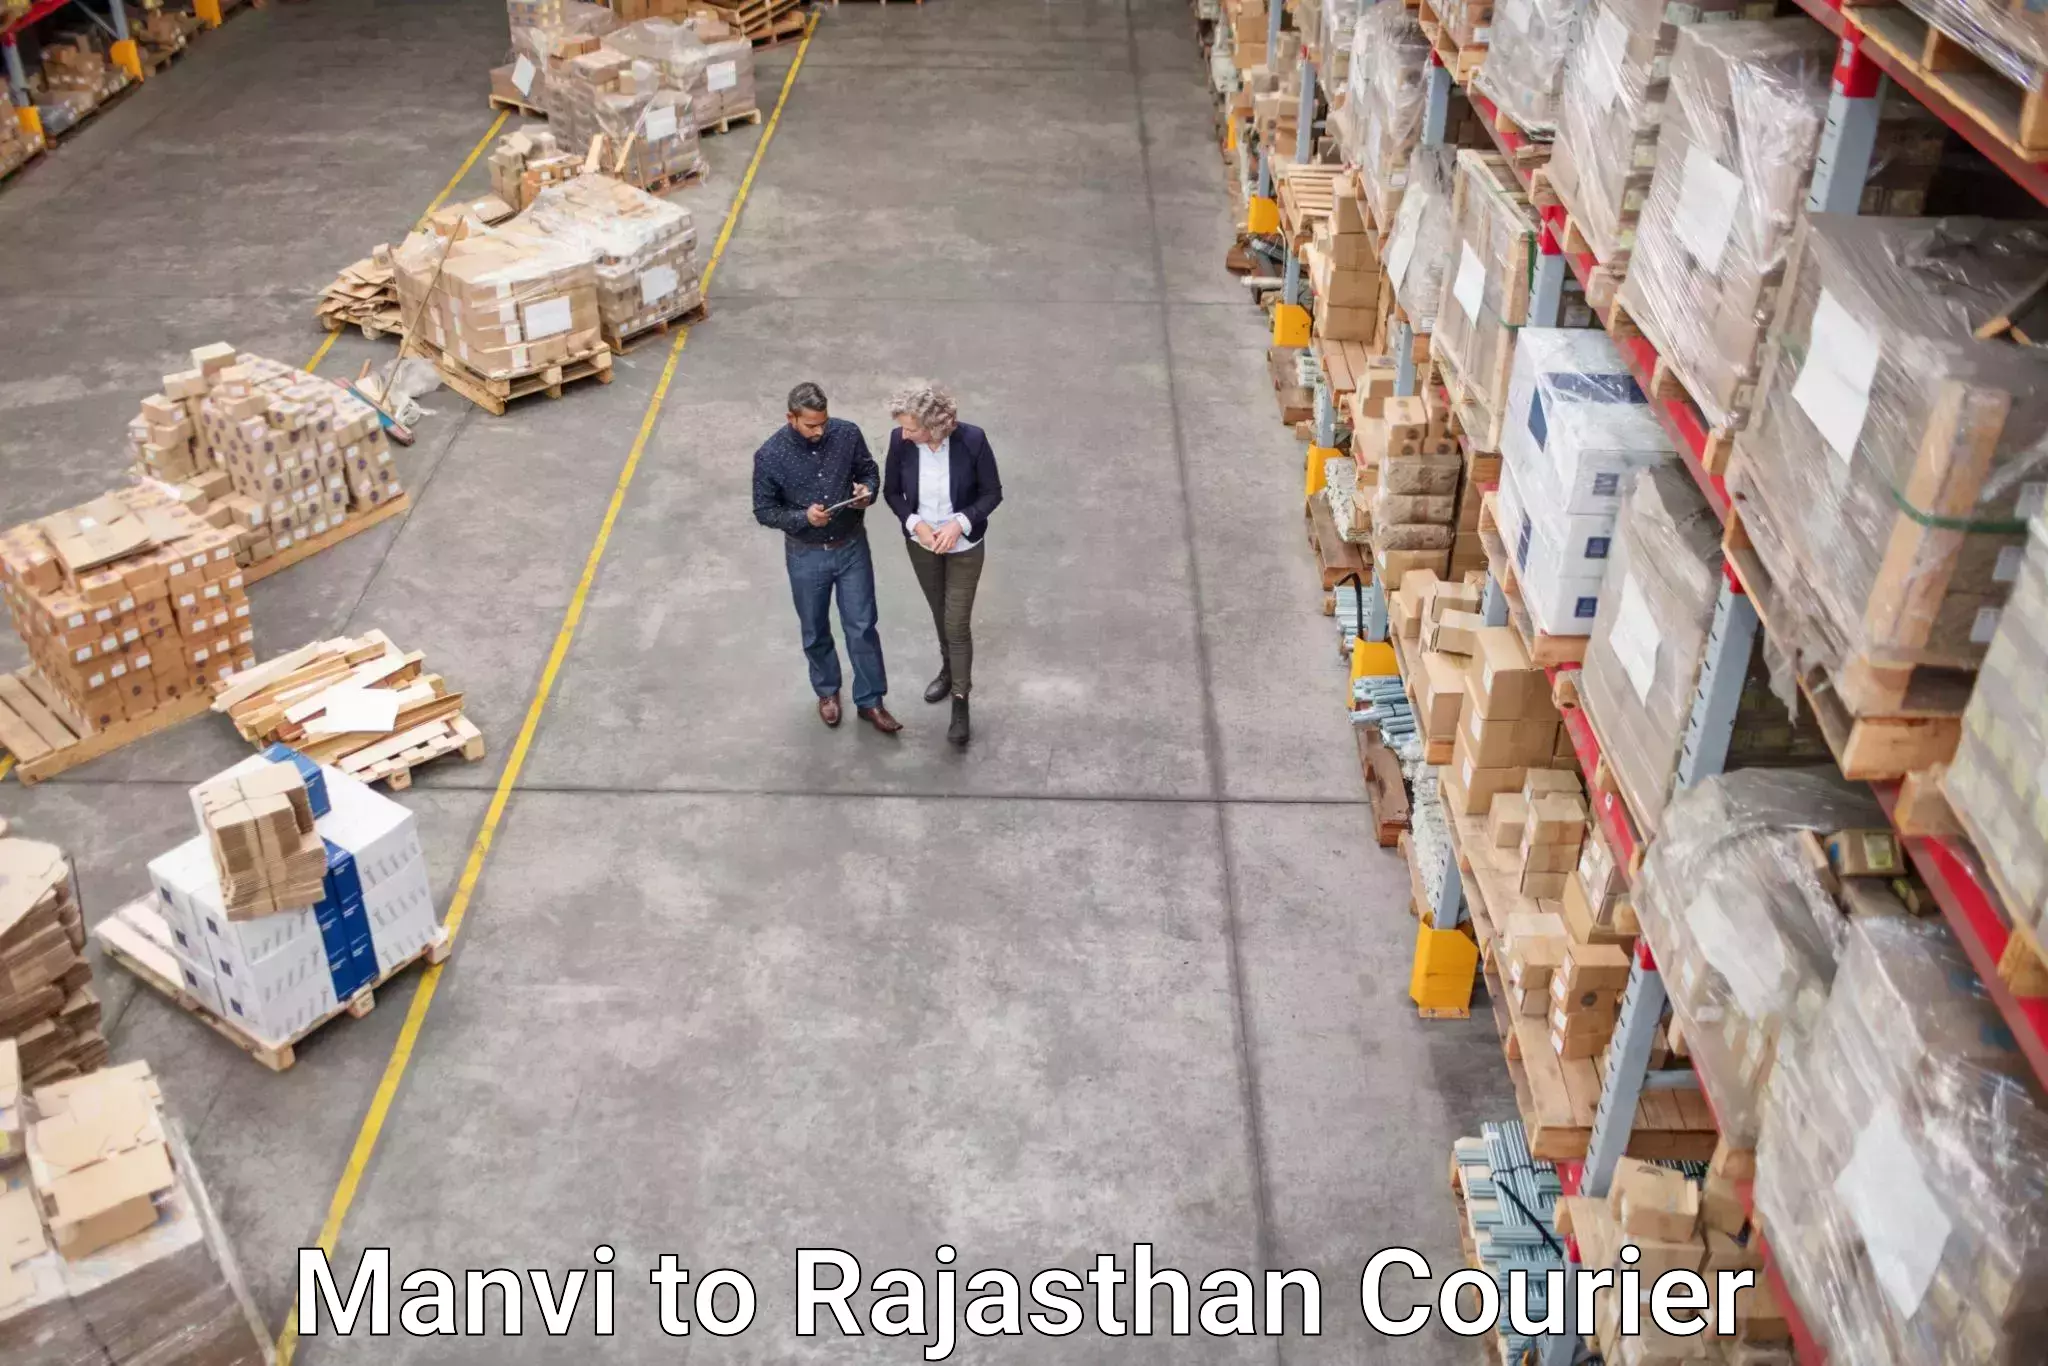 Customer-focused courier Manvi to Yeswanthapur